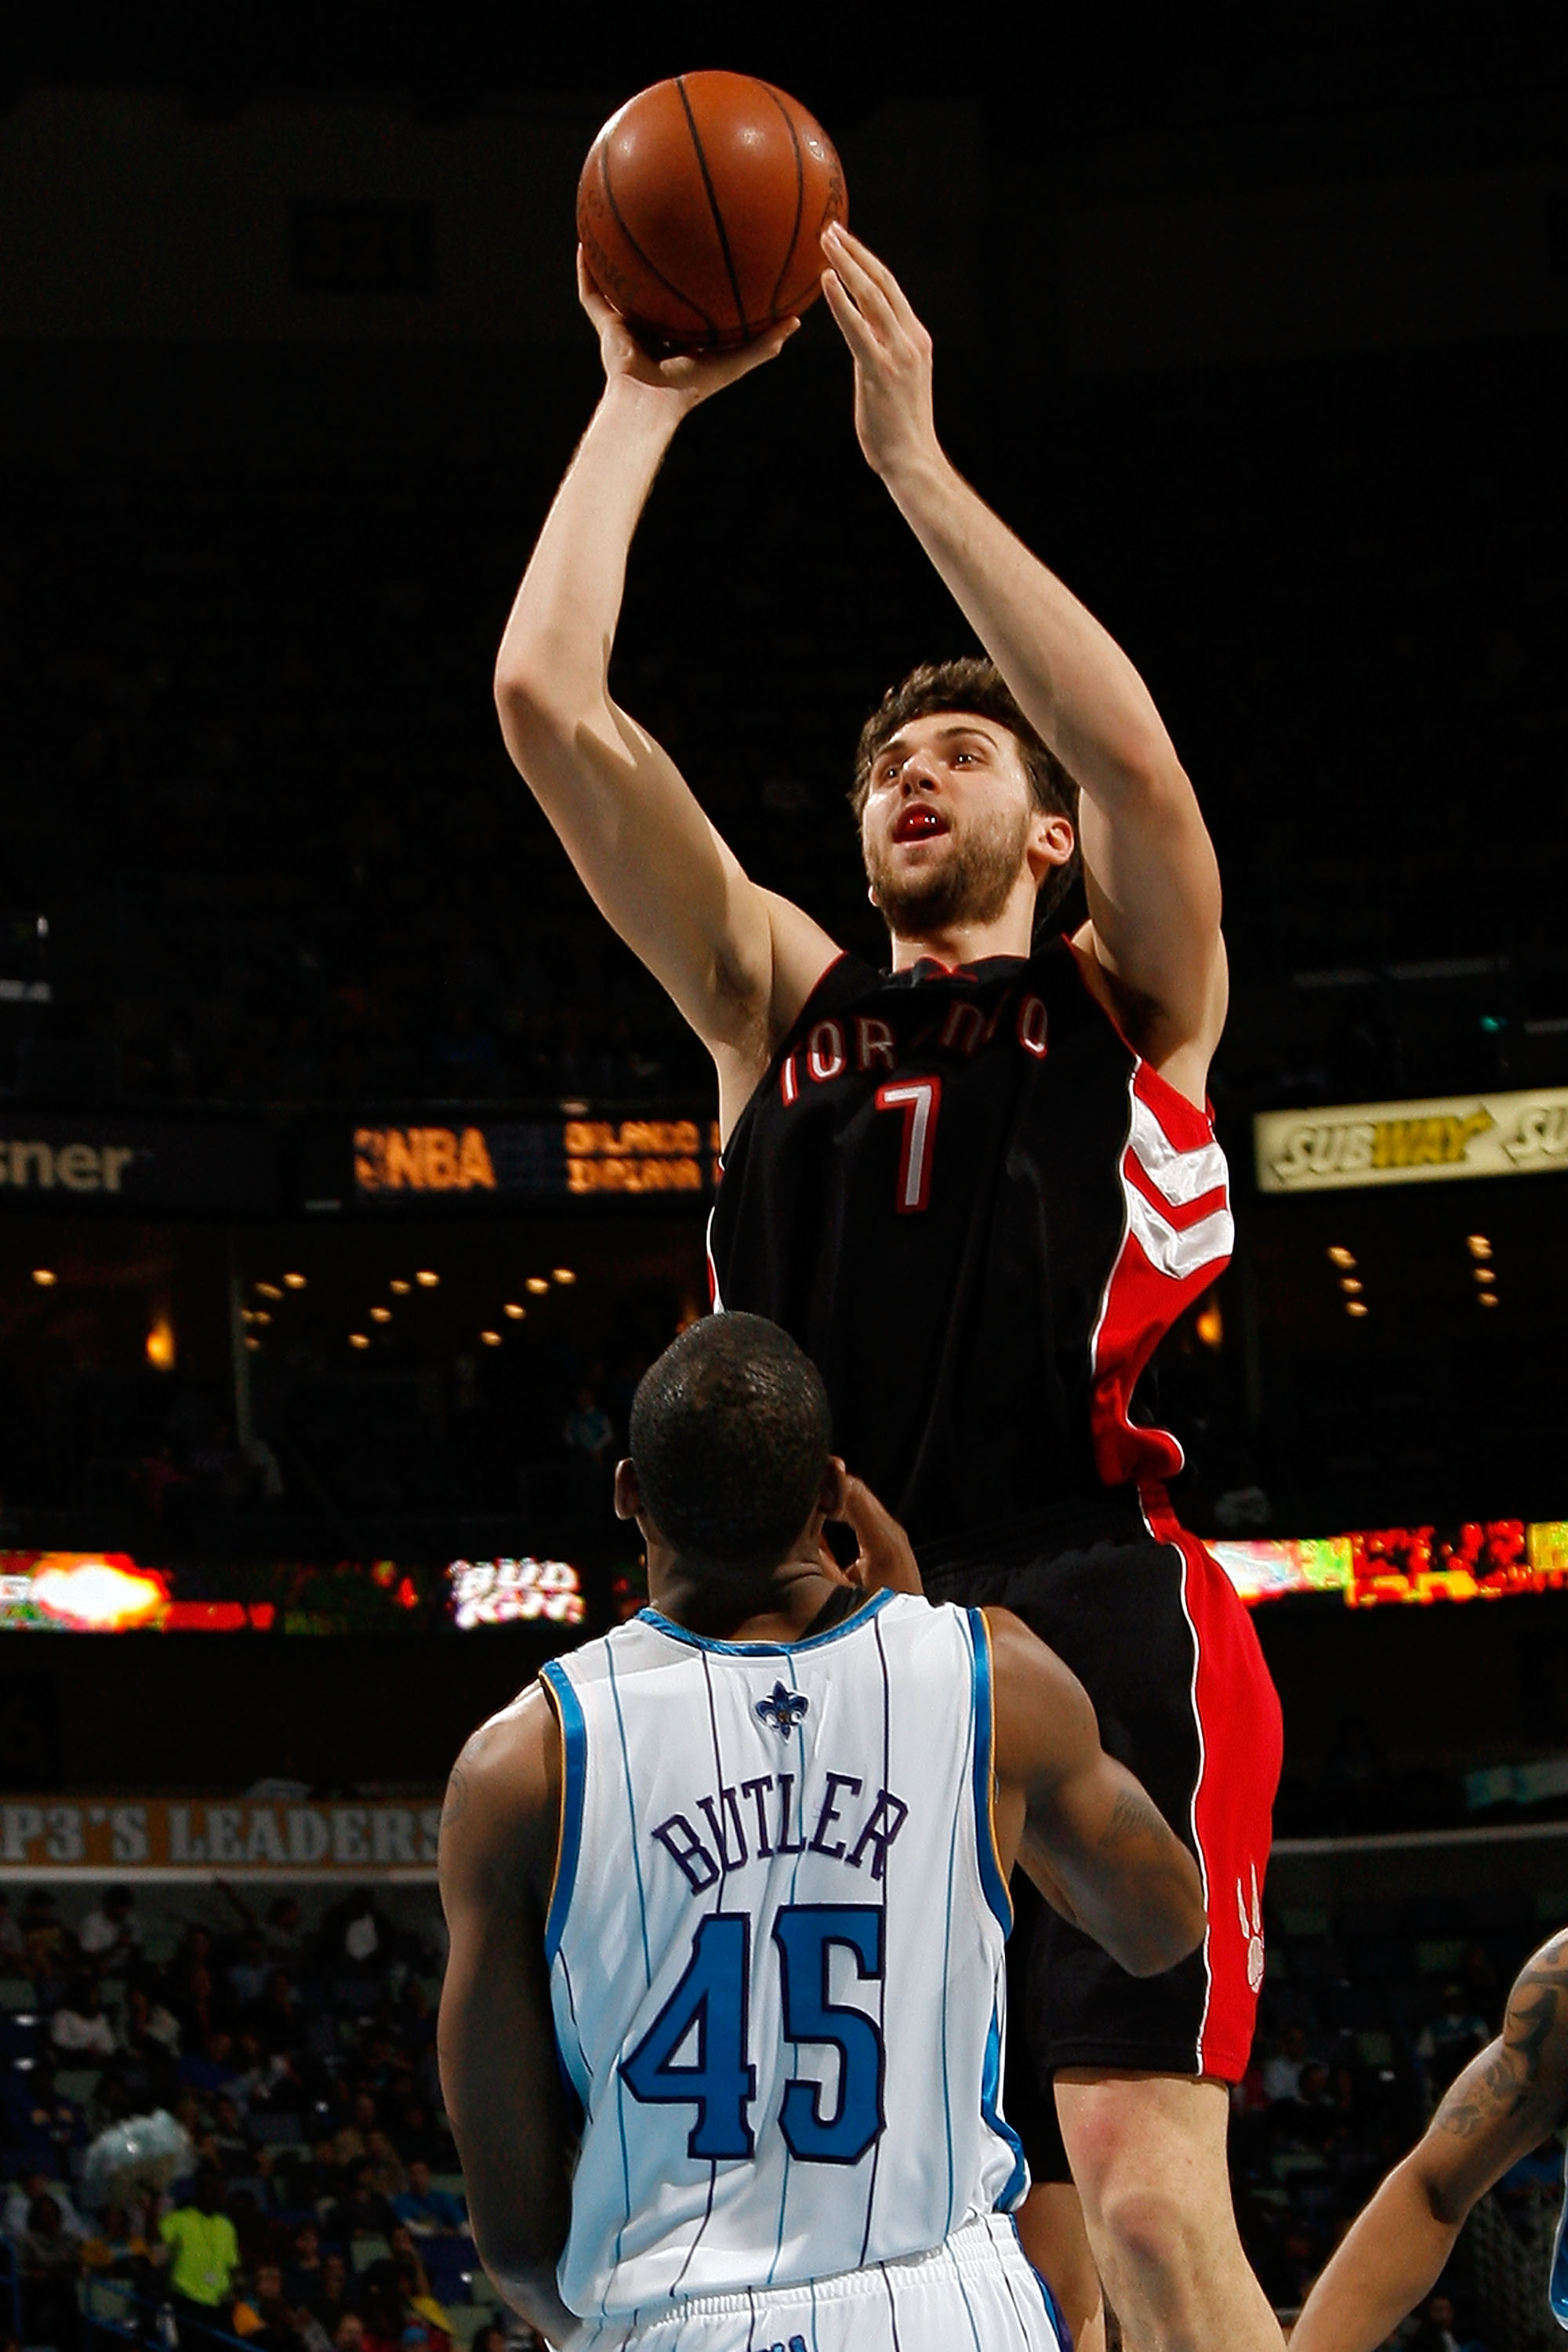 NEW ORLEANS - FEBRUARY 06:  Andrea Bargnani #7 of the Toronto Raptors makes a shot over Rasual Butler #45 of the New Orleans Hornets on February 6, 2009 in New Orleans, Louisiana. The Hornets defeated the Raptors 101-92.   NOTE TO USER: User expressly ack